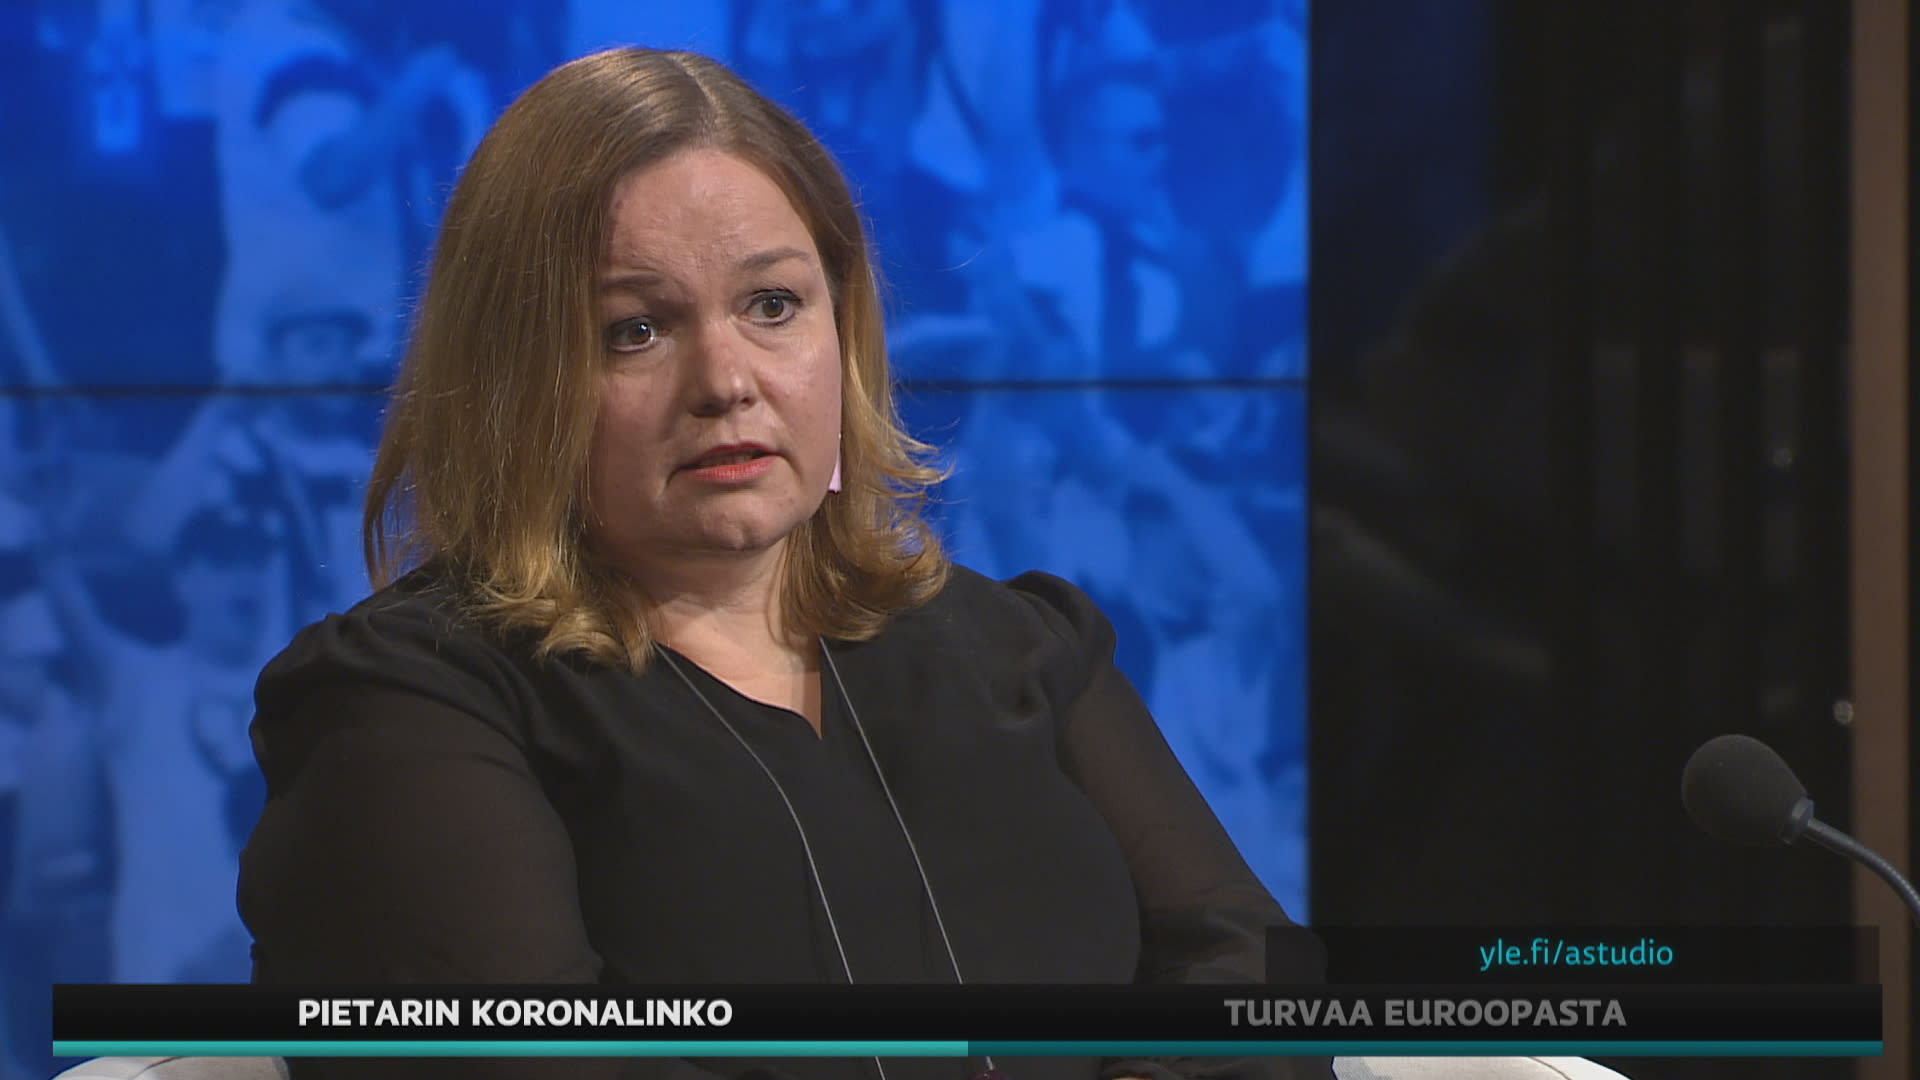 Minister of Health: "We cannot put citizens of other countries ahead of Finns"